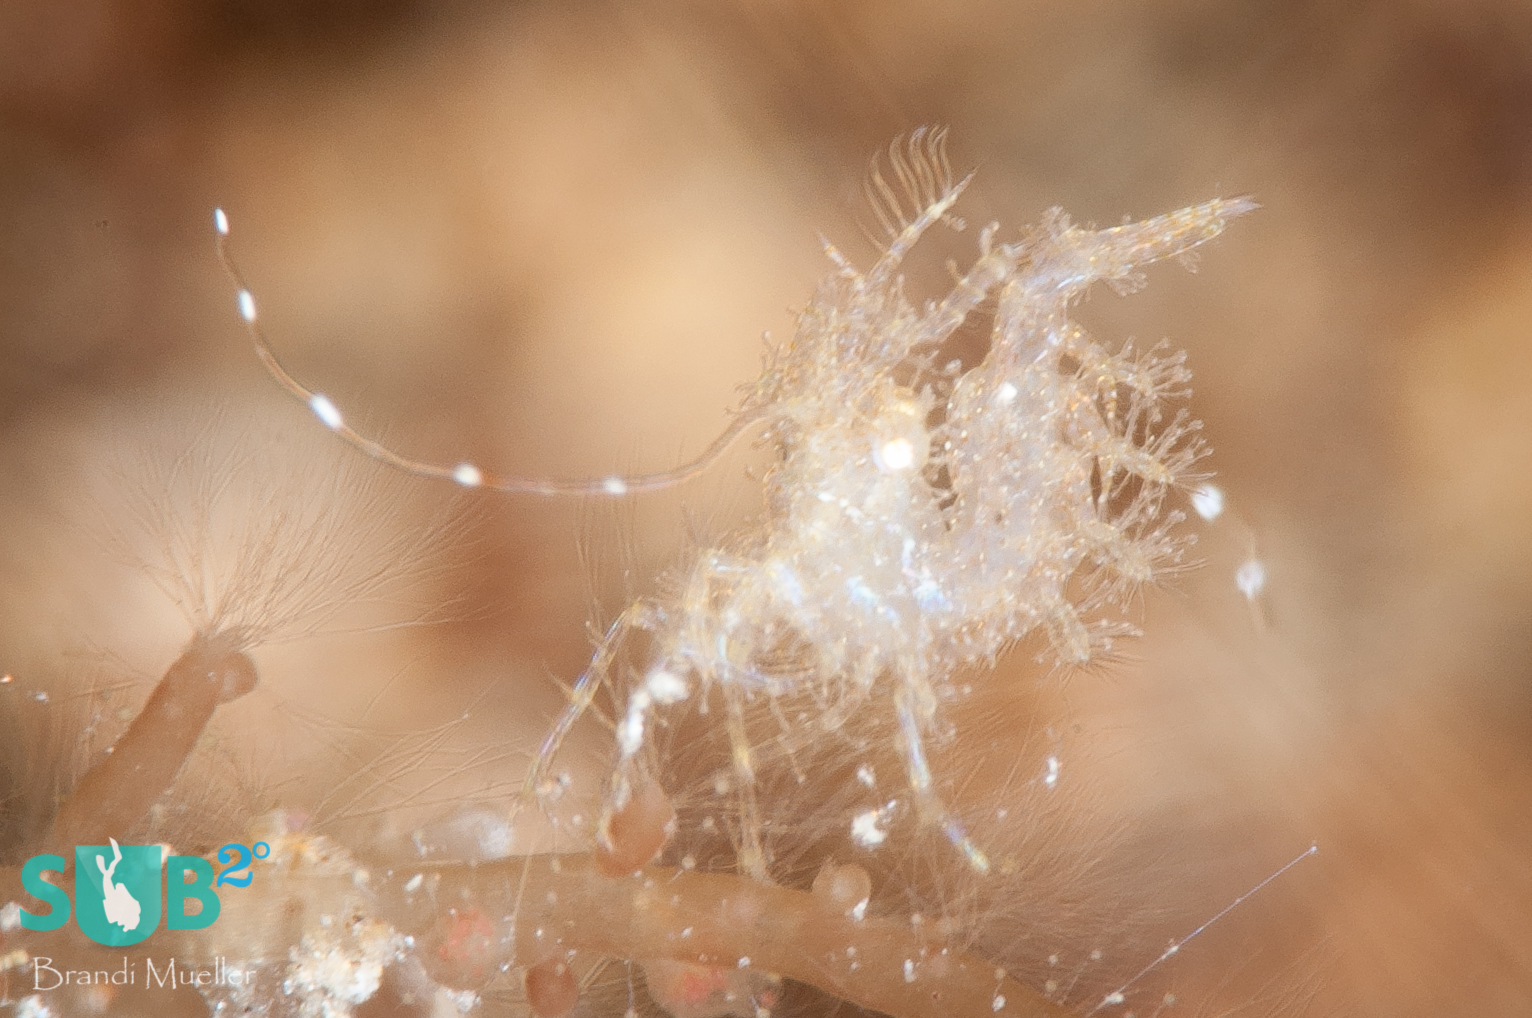 A tiny hairy shrimp, only about 4 millimeters long, is hardly visible to the naked eye.